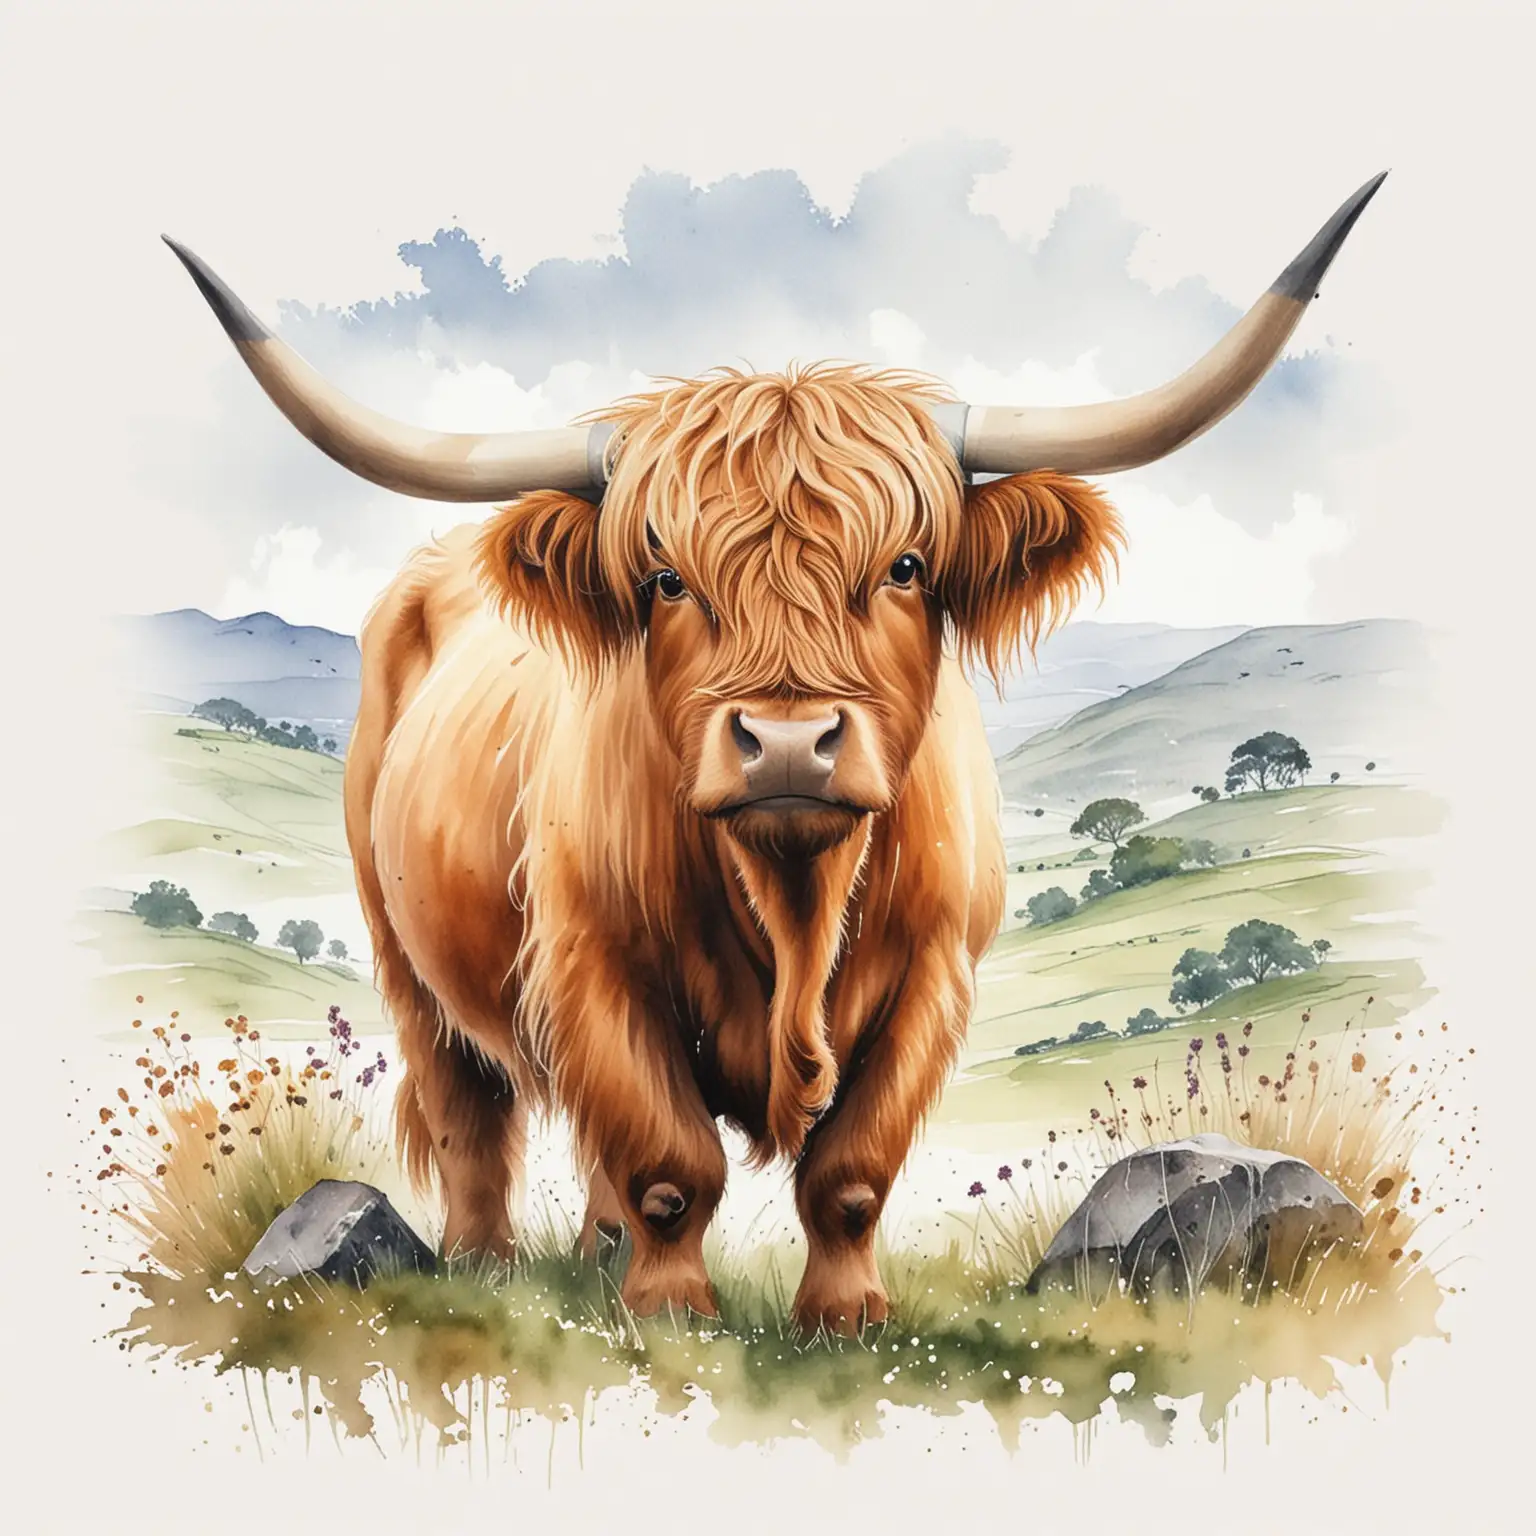 Adorable Highland Cow Watercolor Drawing Isolated on White Background for Clip Art